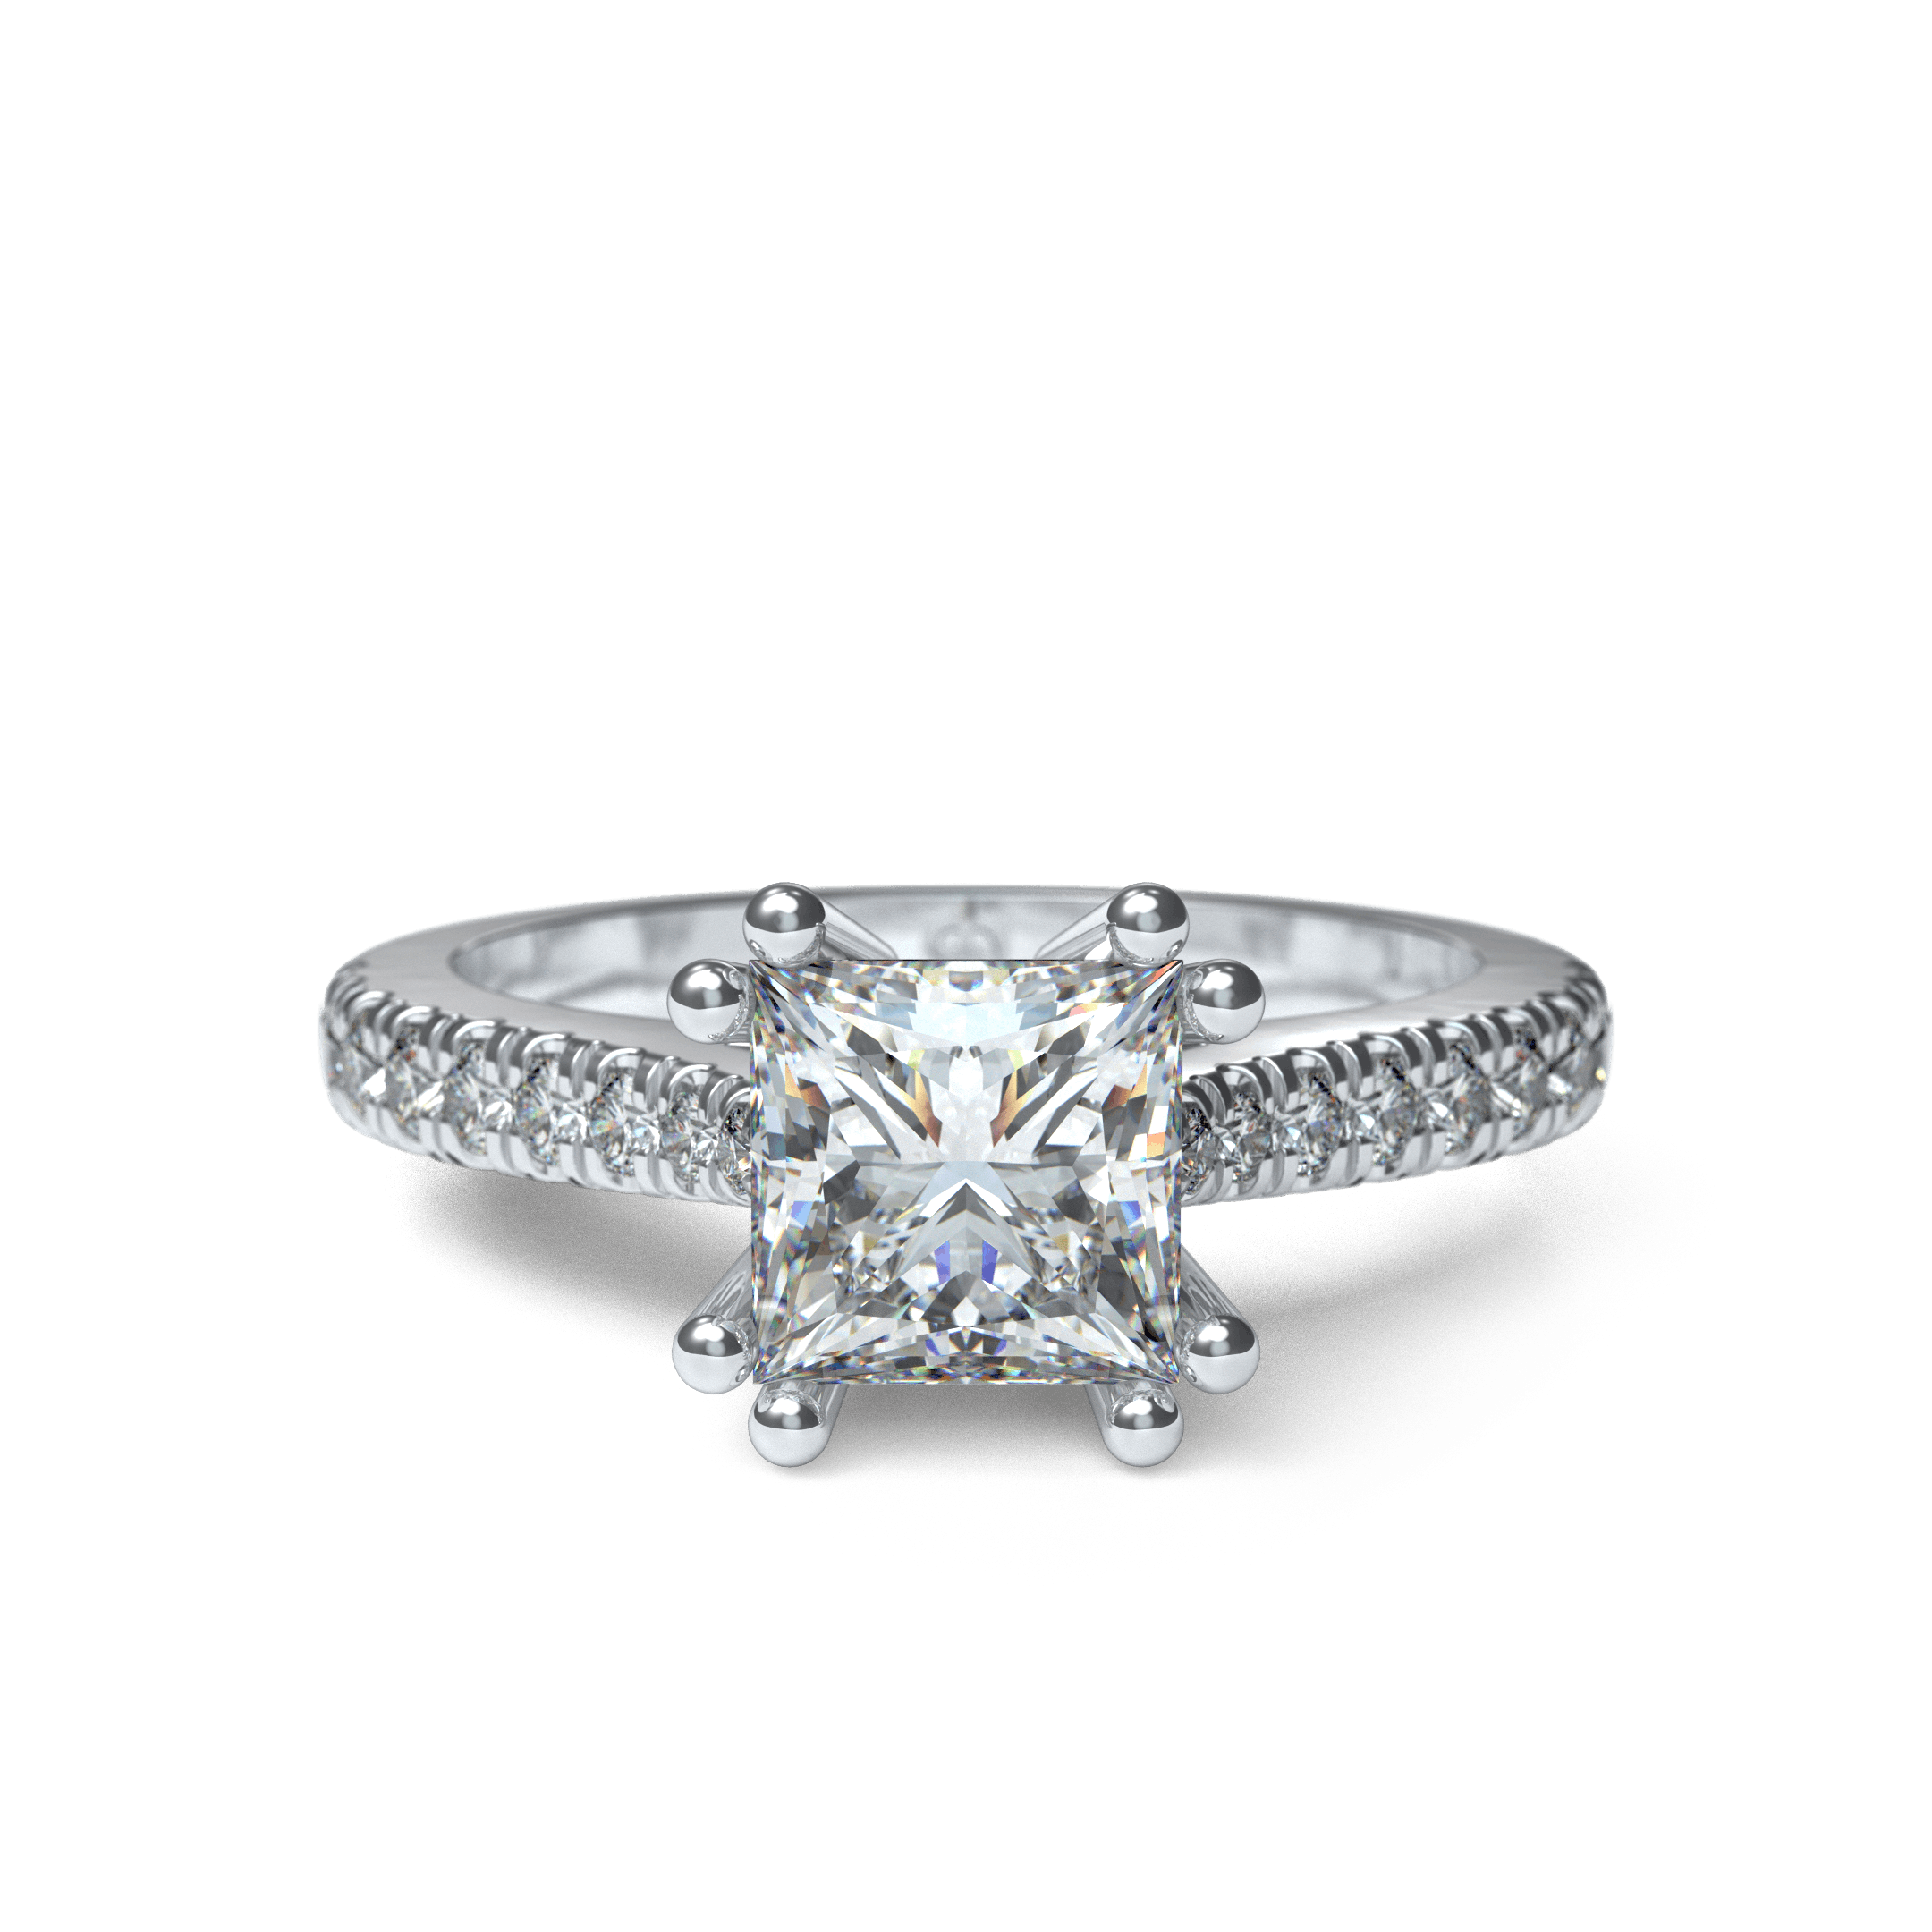 Best engagement rings of 2022 | Proposal Ideas and Planning